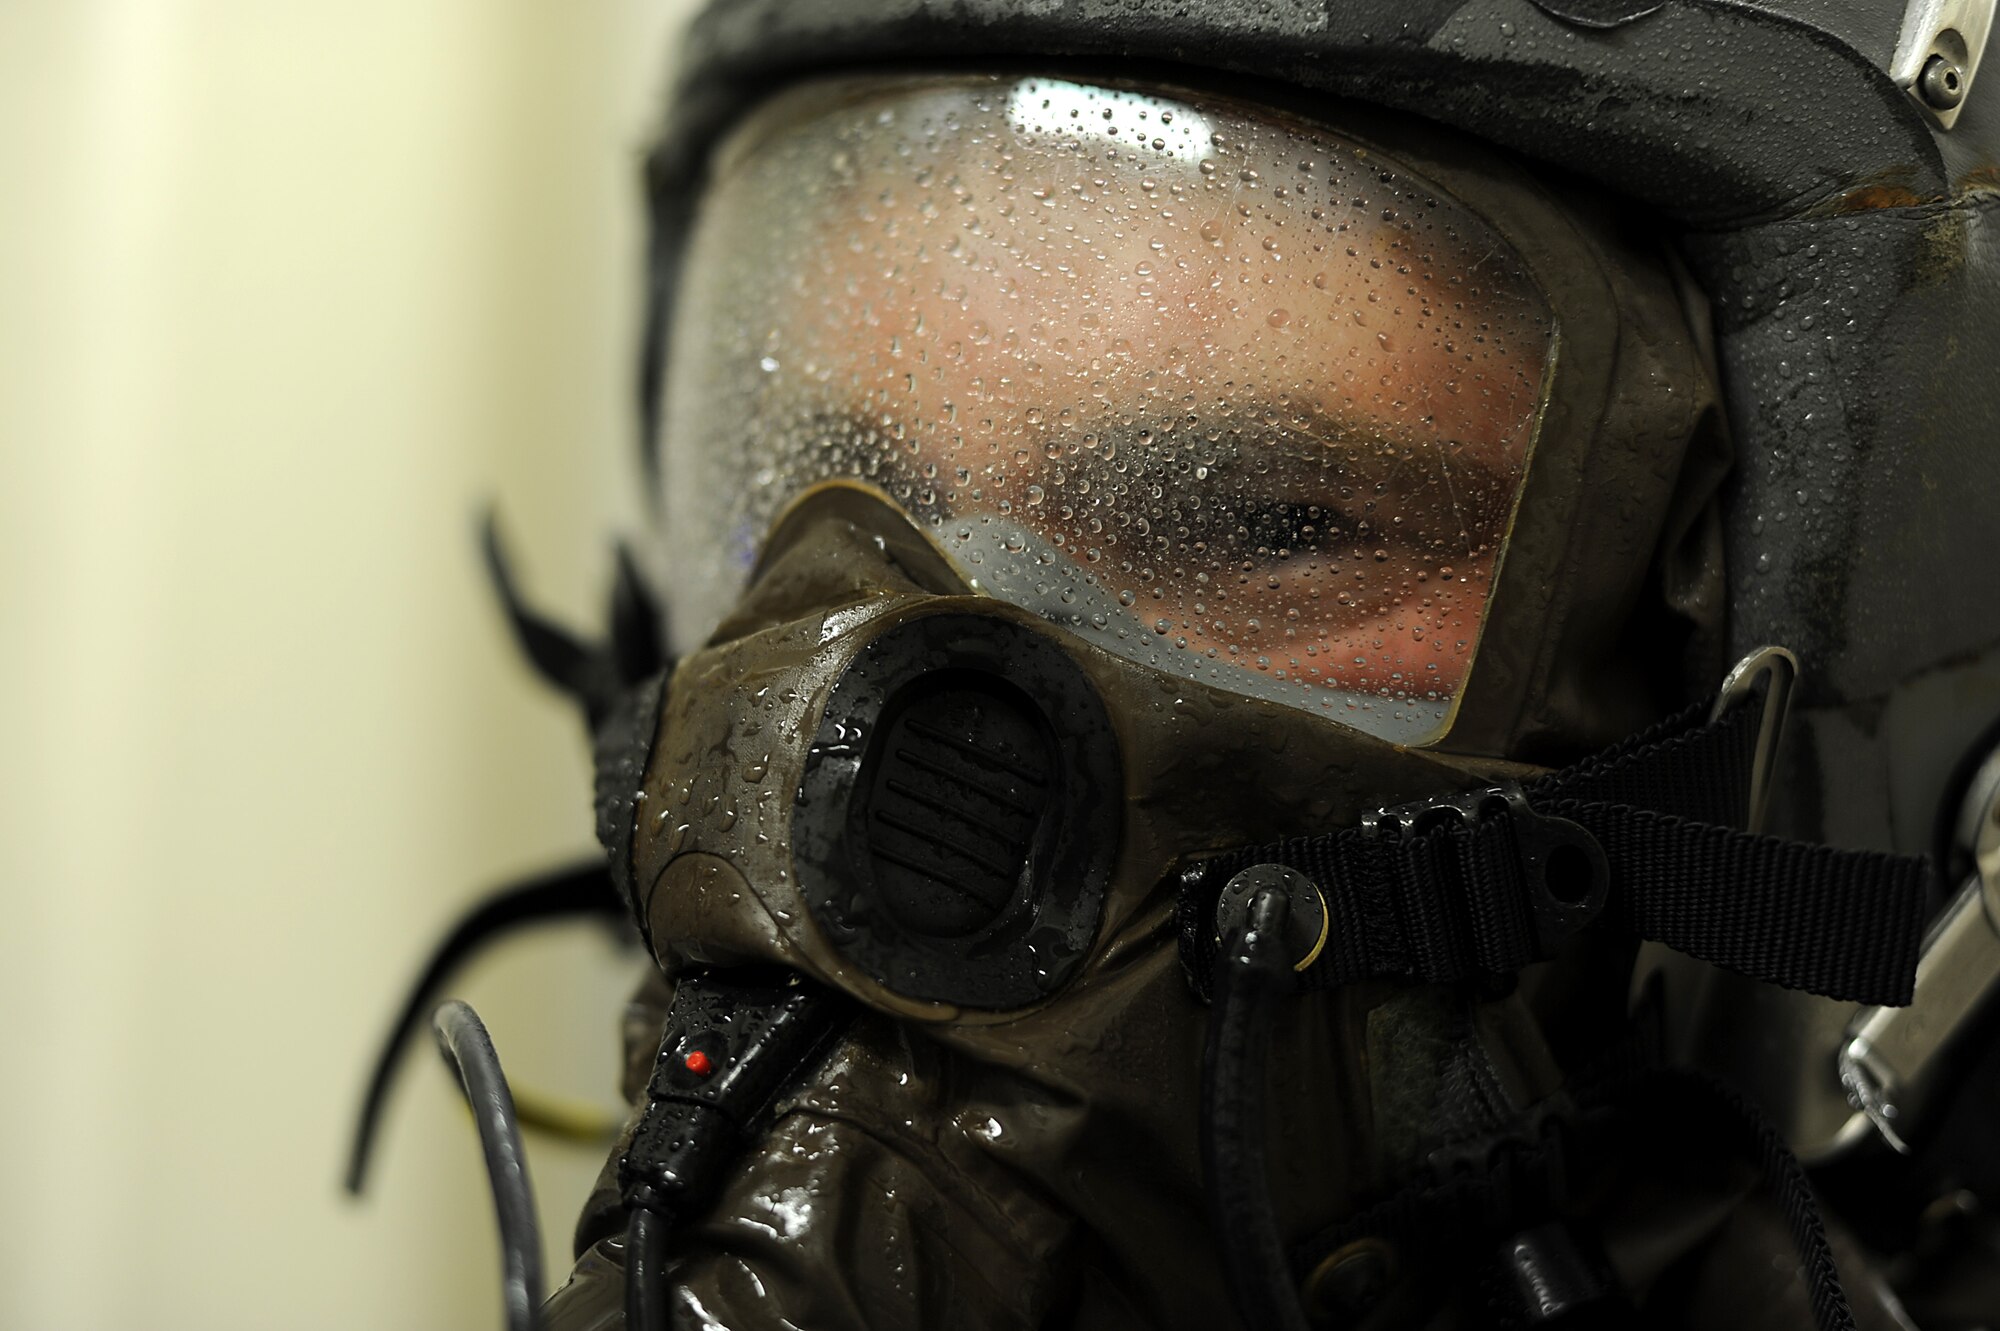 Capt. Robert Carpenter, 25th Fighter Squadron pilot, holds still while being sprayed with a solution in order to help decontaminate him after simulated exposure to a potential chemical, biological or radiological environment during Operational Readiness Exercise Beverly Midnight 13-03, Aug. 5, 2013. Osan Airmen are in the fourth simulated wartime contingency exercise executed in 2013 that will test the base's ability to defend and execute the mission in a heightened state of readiness. (U.S. Air Force photo by Staff Sgt. Sara Csurilla)